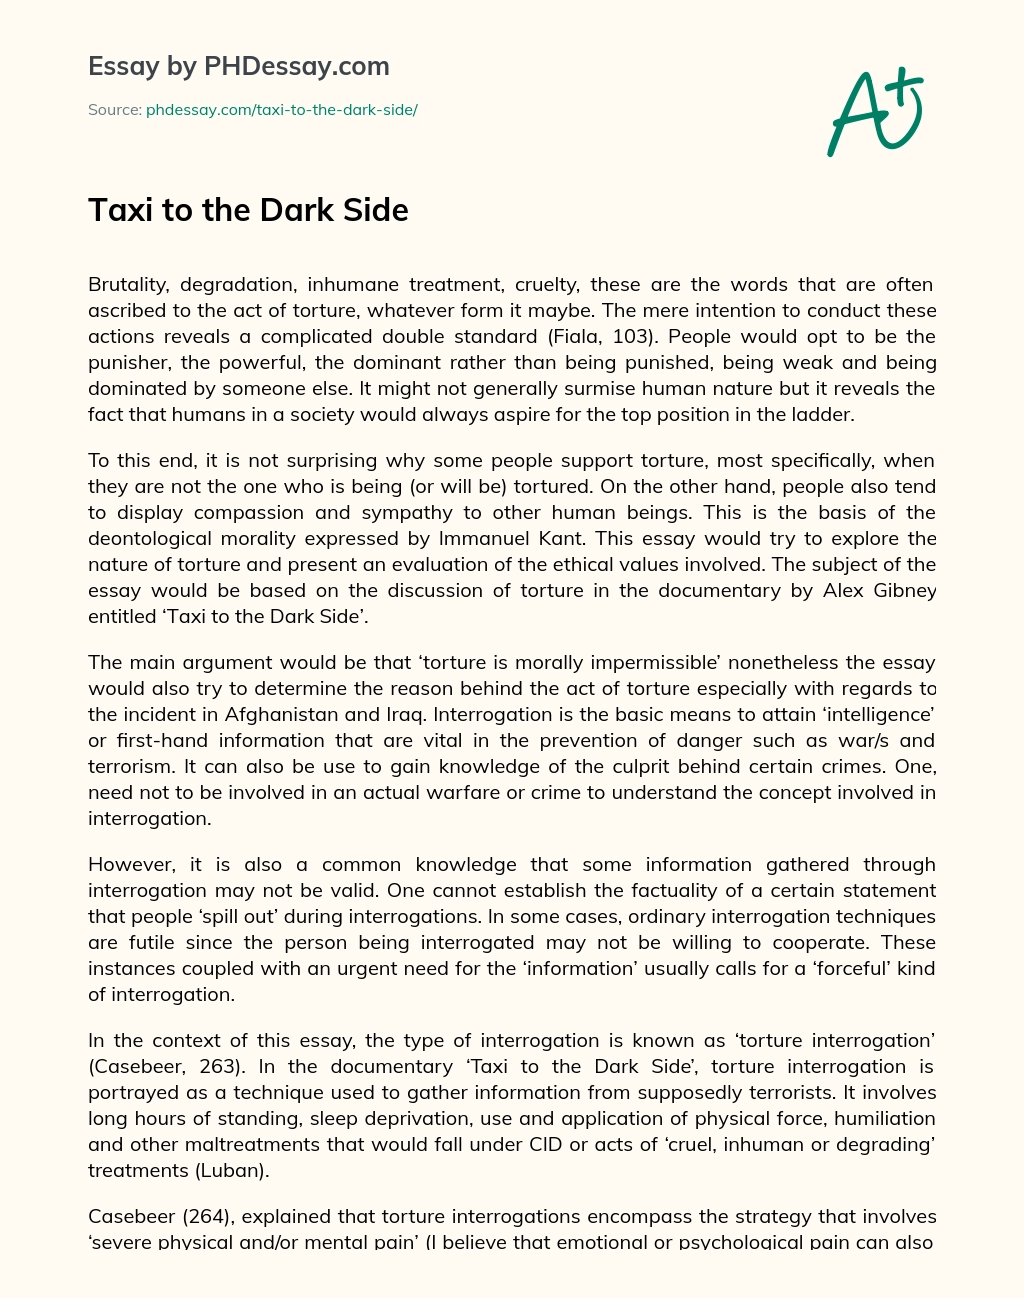 Taxi to the Dark Side essay